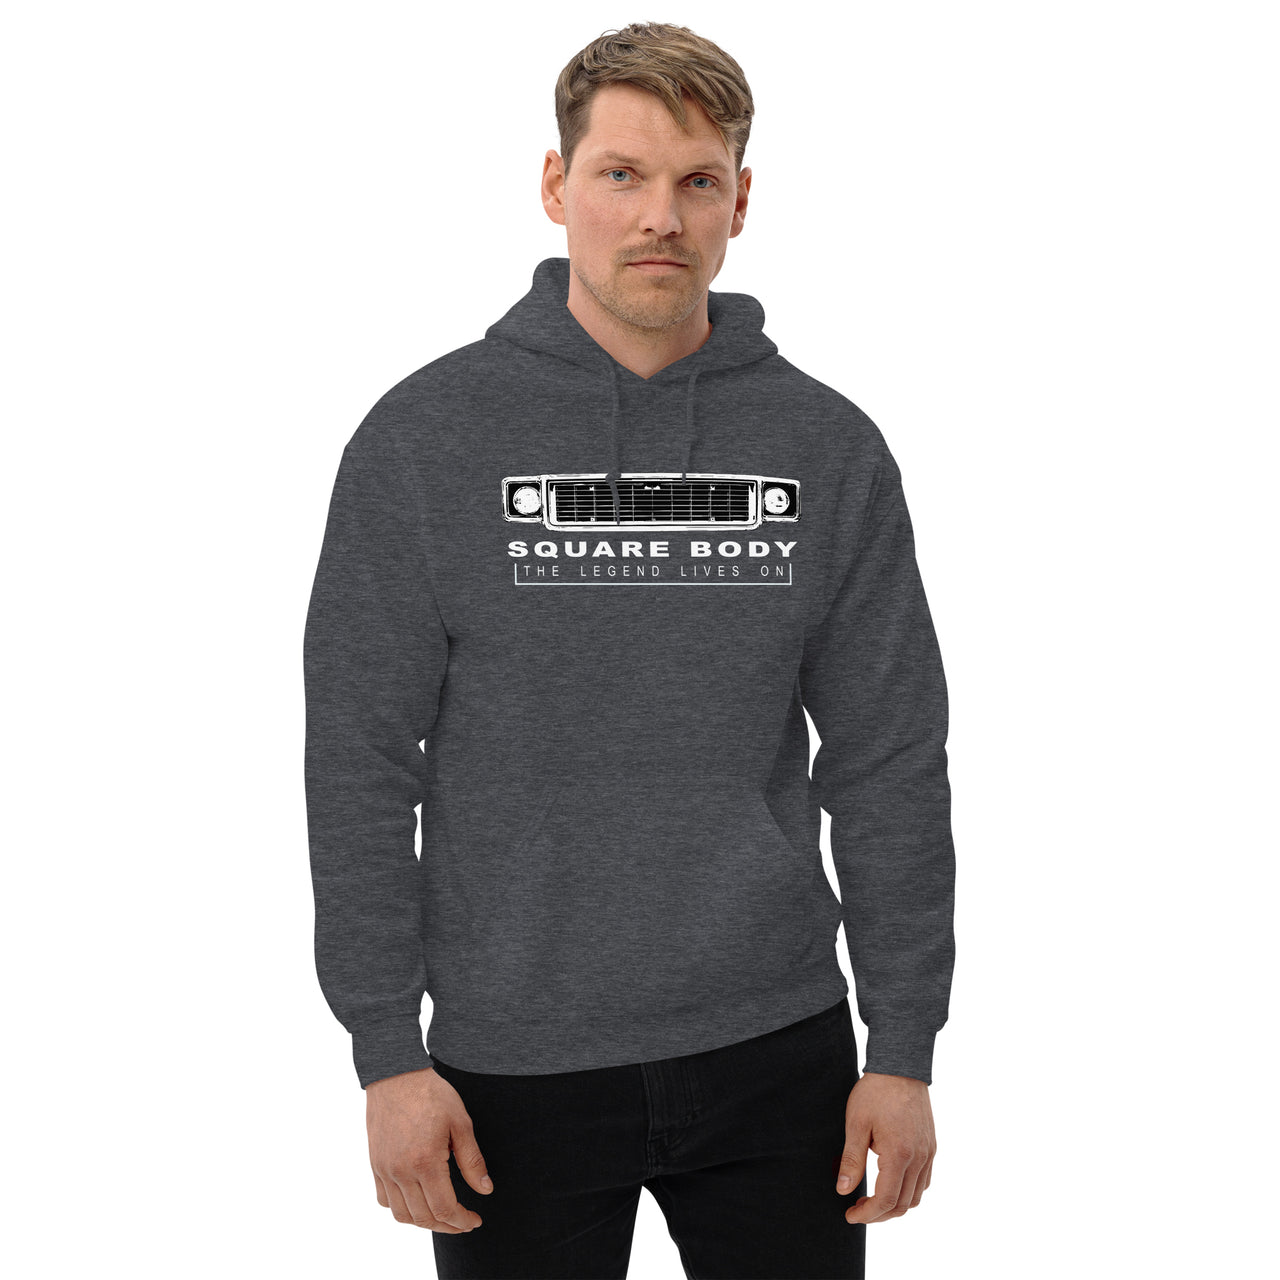 70s Square Body The Legend Lives On Hoodie modeled in grey